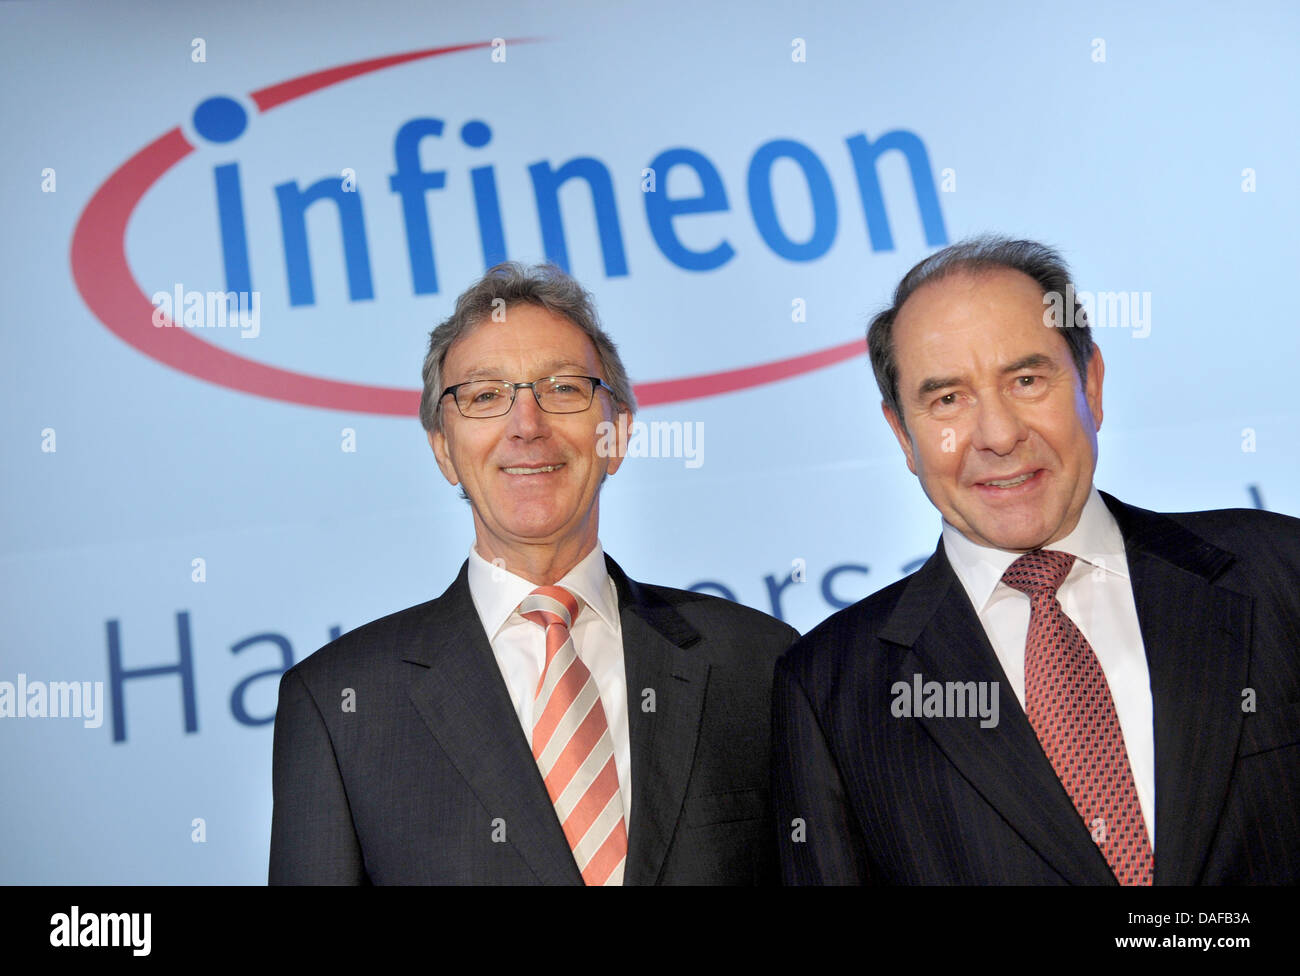 Prospective new chairman of the supervisory board of semiconductor manufacturer 'Infineon' Wolfgang Mayrhuber (L) and the present chairman Klaus Wucherer shake hands during the general meeting in Munich, Germany, 17 February 2011. Photo: ANDREAS GEBERT Stock Photo